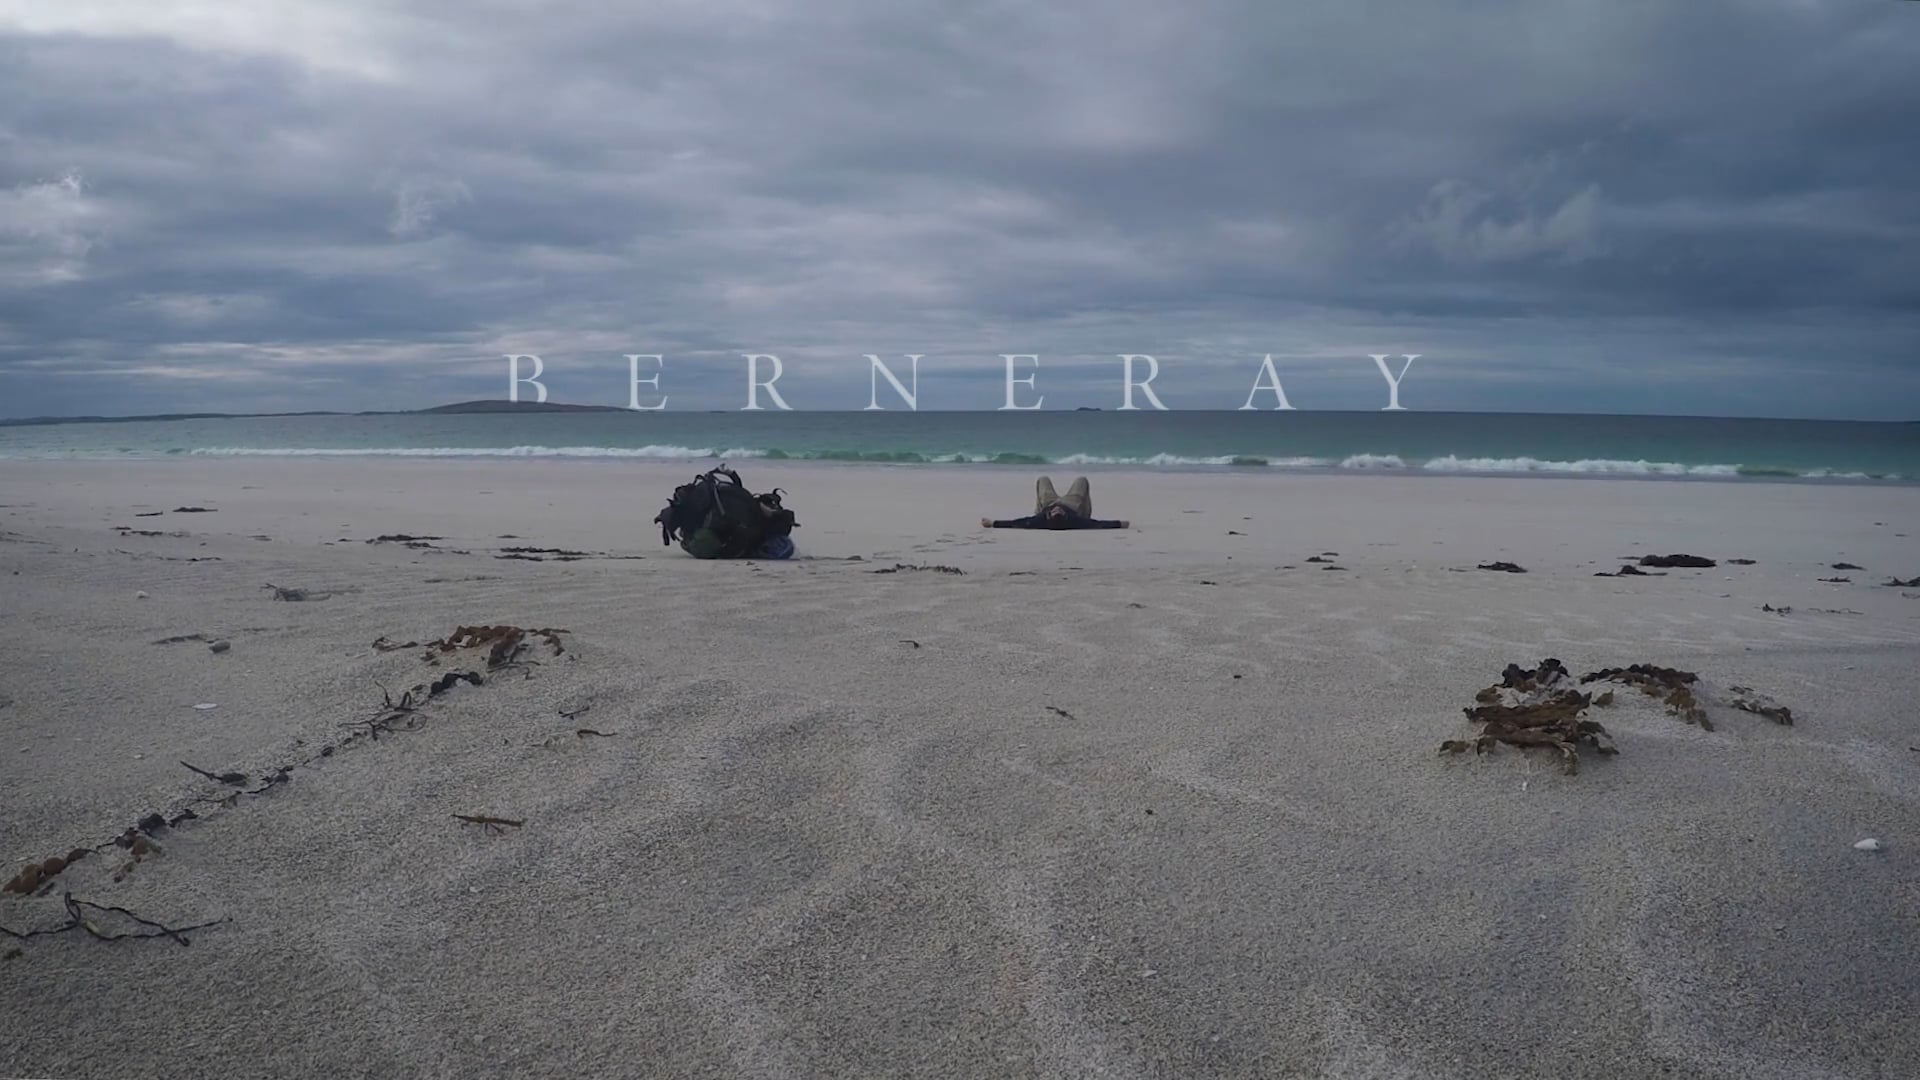 Berneray and Back